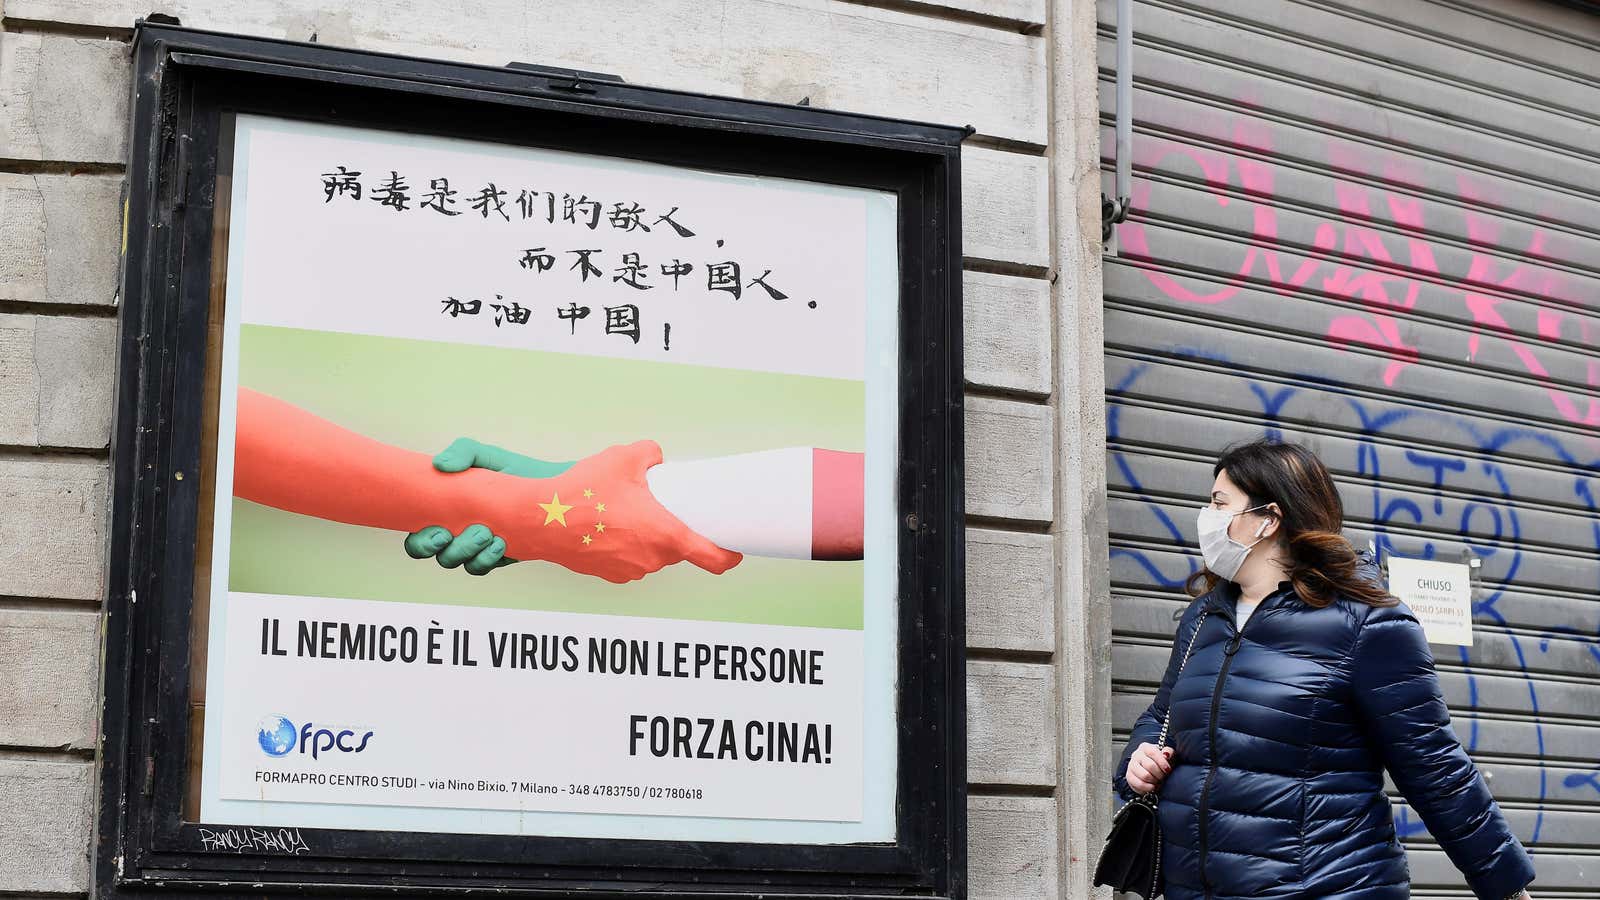 A placard in Italy reads: “The enemy is the virus, not the people. Come on China!”